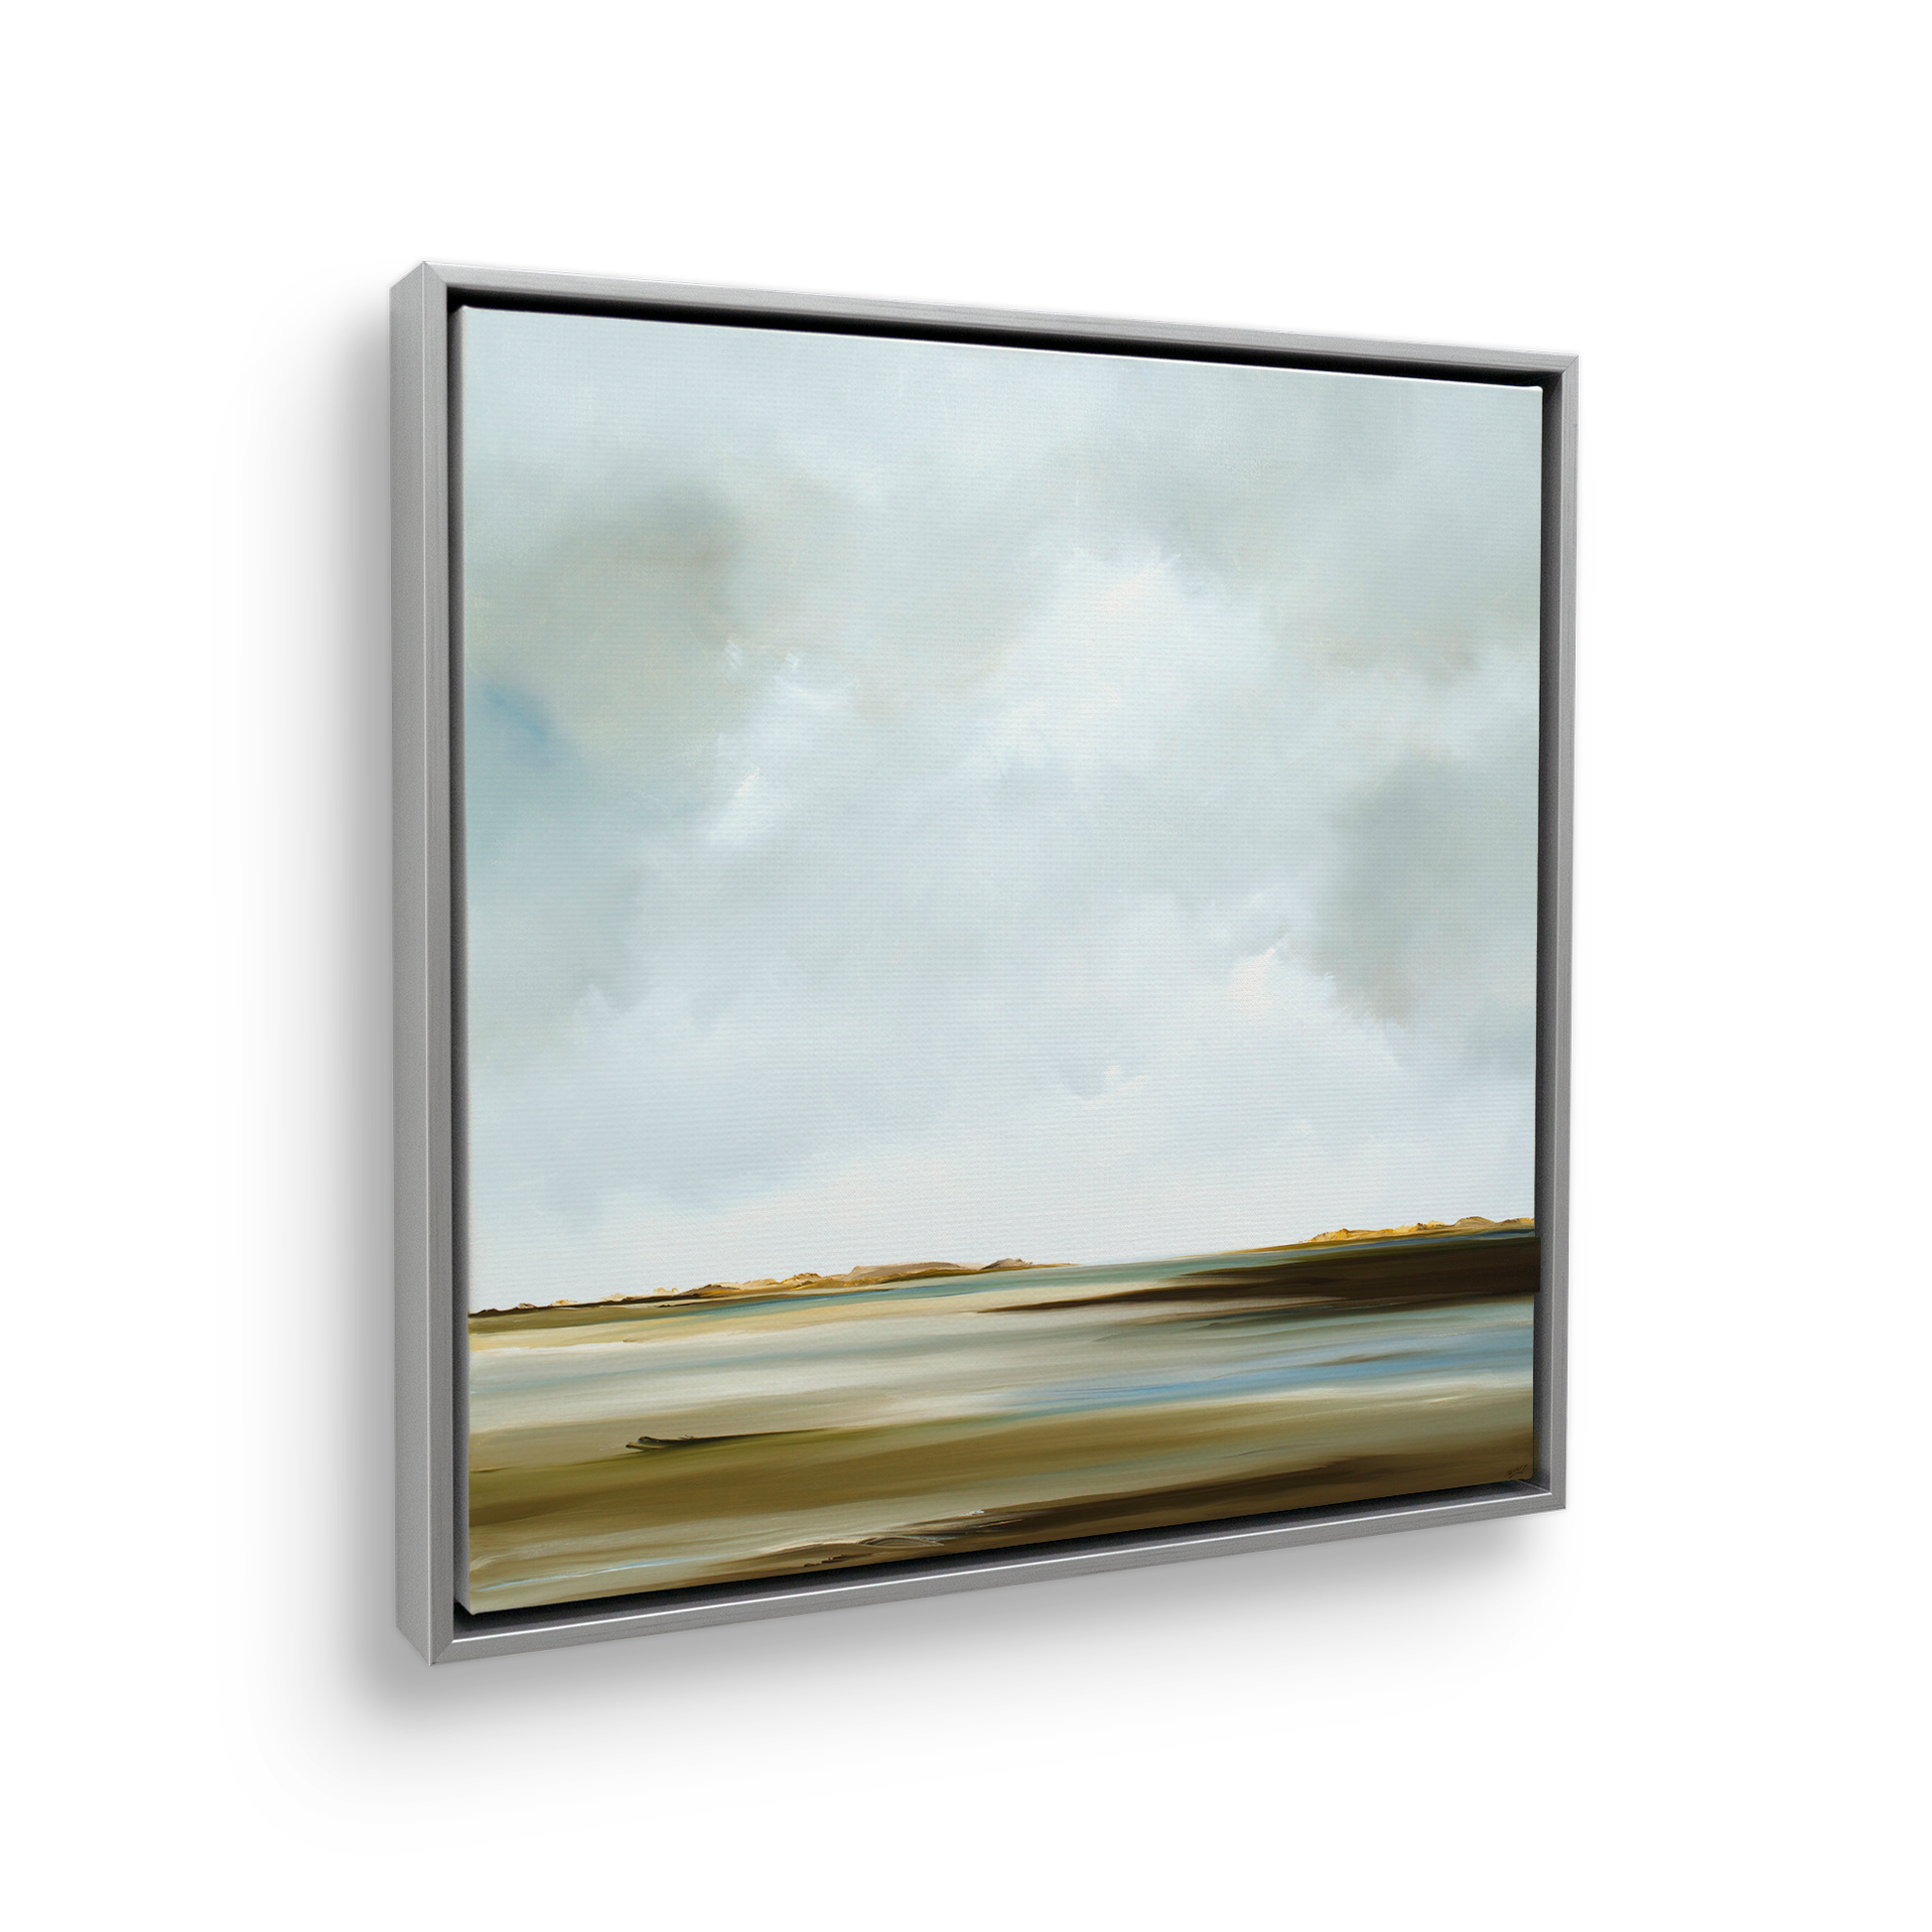 [color:Polished Chrome],[shape:square], Picture of art in a black frame at angle